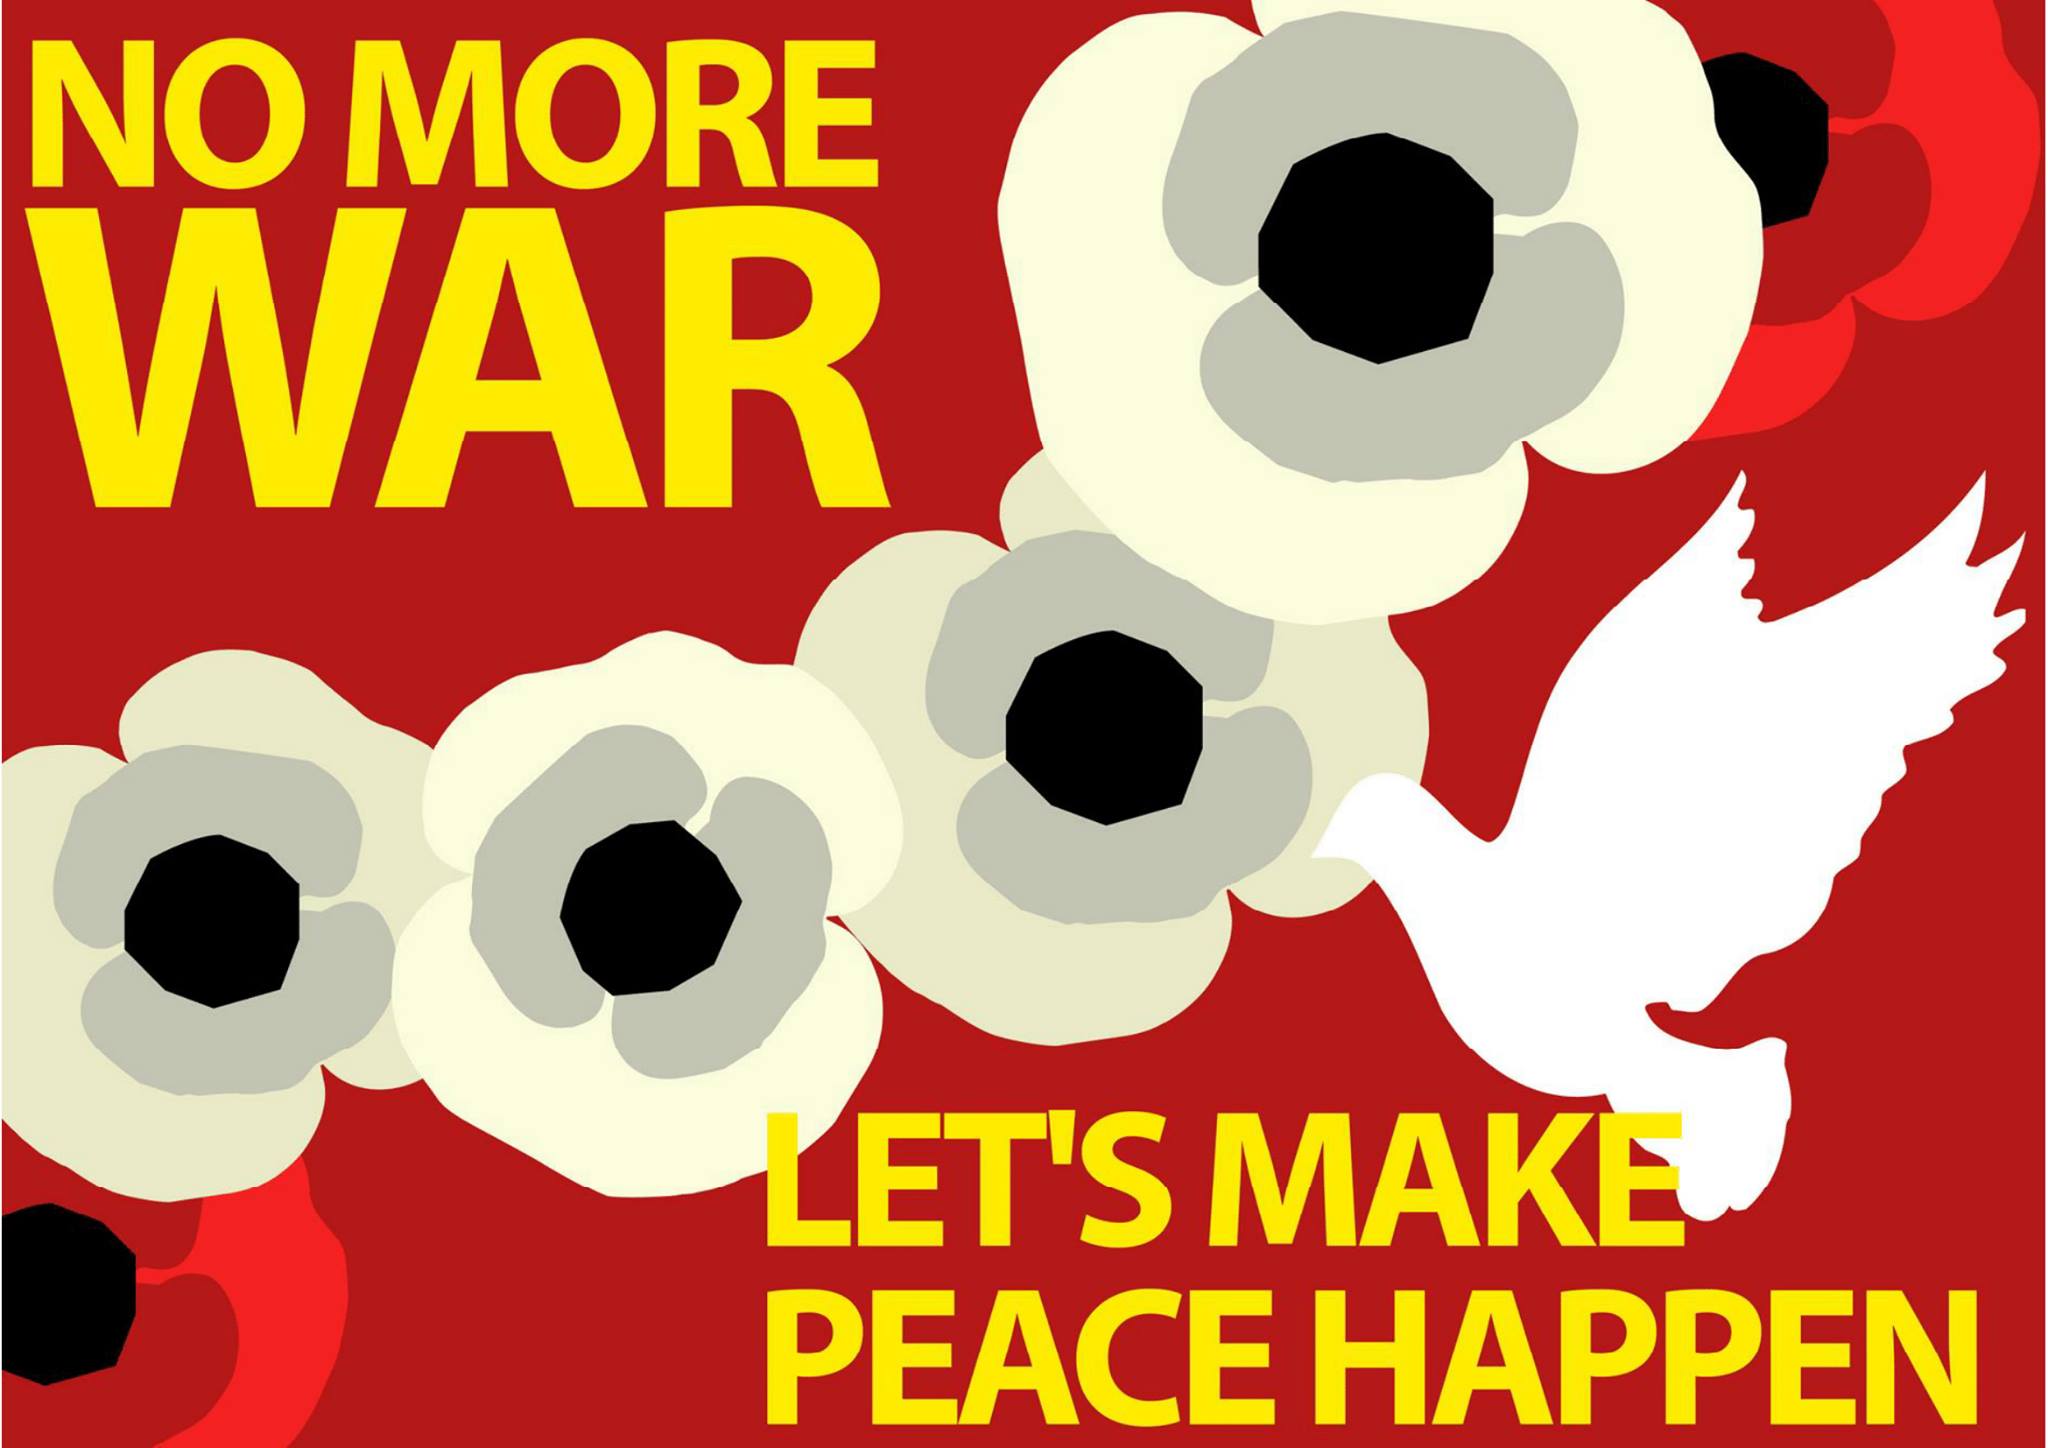 White poppies for peace and a white dove on a poster reading "No more war - let's make peace happen"